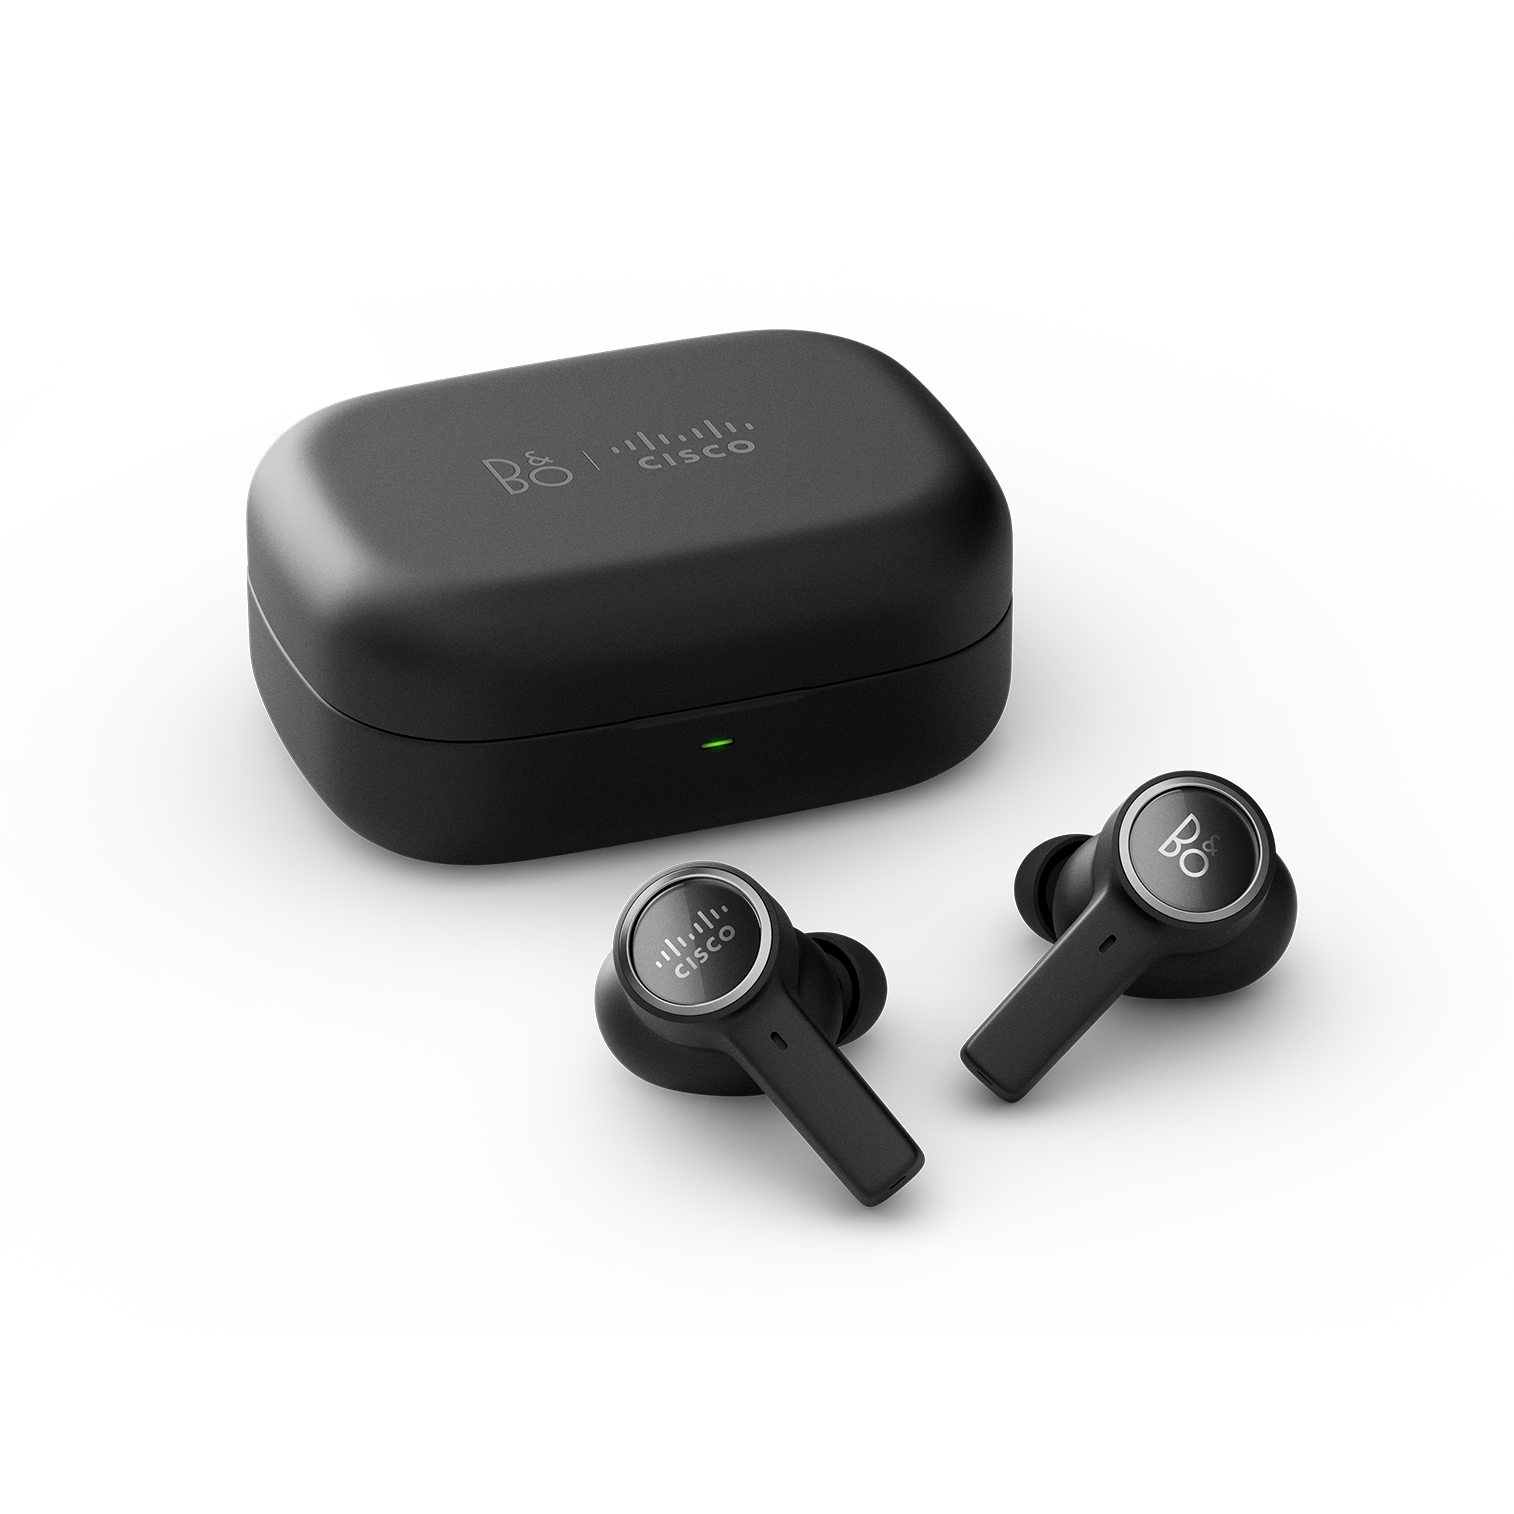 Bang & Olufsen Cisco 950: Earbuds designed for professionals